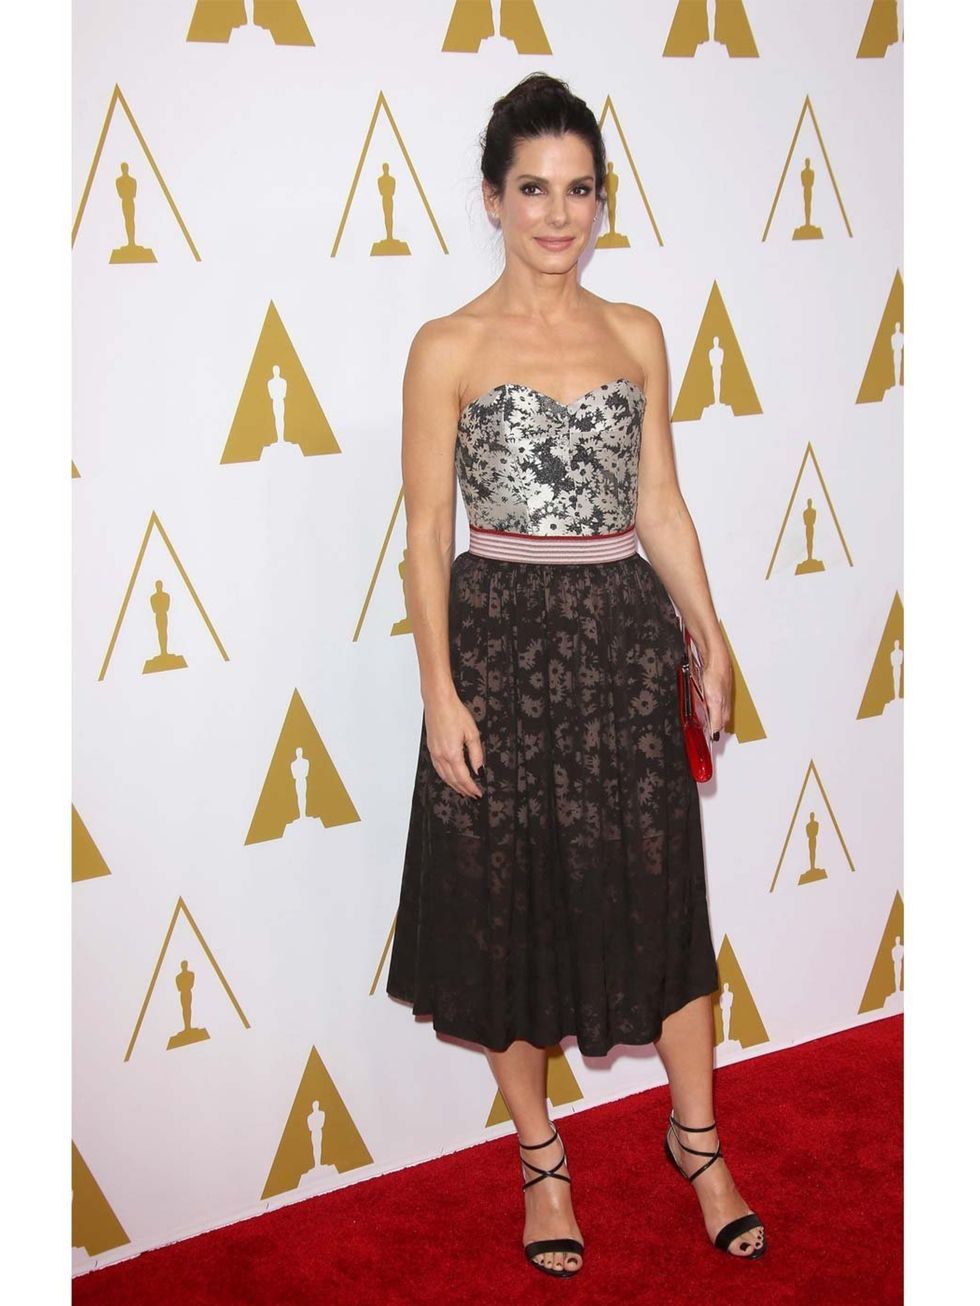 <p><a href="http://www.elleuk.com/star-style/celebrity-style-files/sandra-bullock-celebrity-red-carpet-gravity-victoria-beckham-stella-mccartney-jenny-packham">Sandra Bullock</a> wears Stella McCartney to the 86th Annual Academy Awards Nominee Luncheon.</